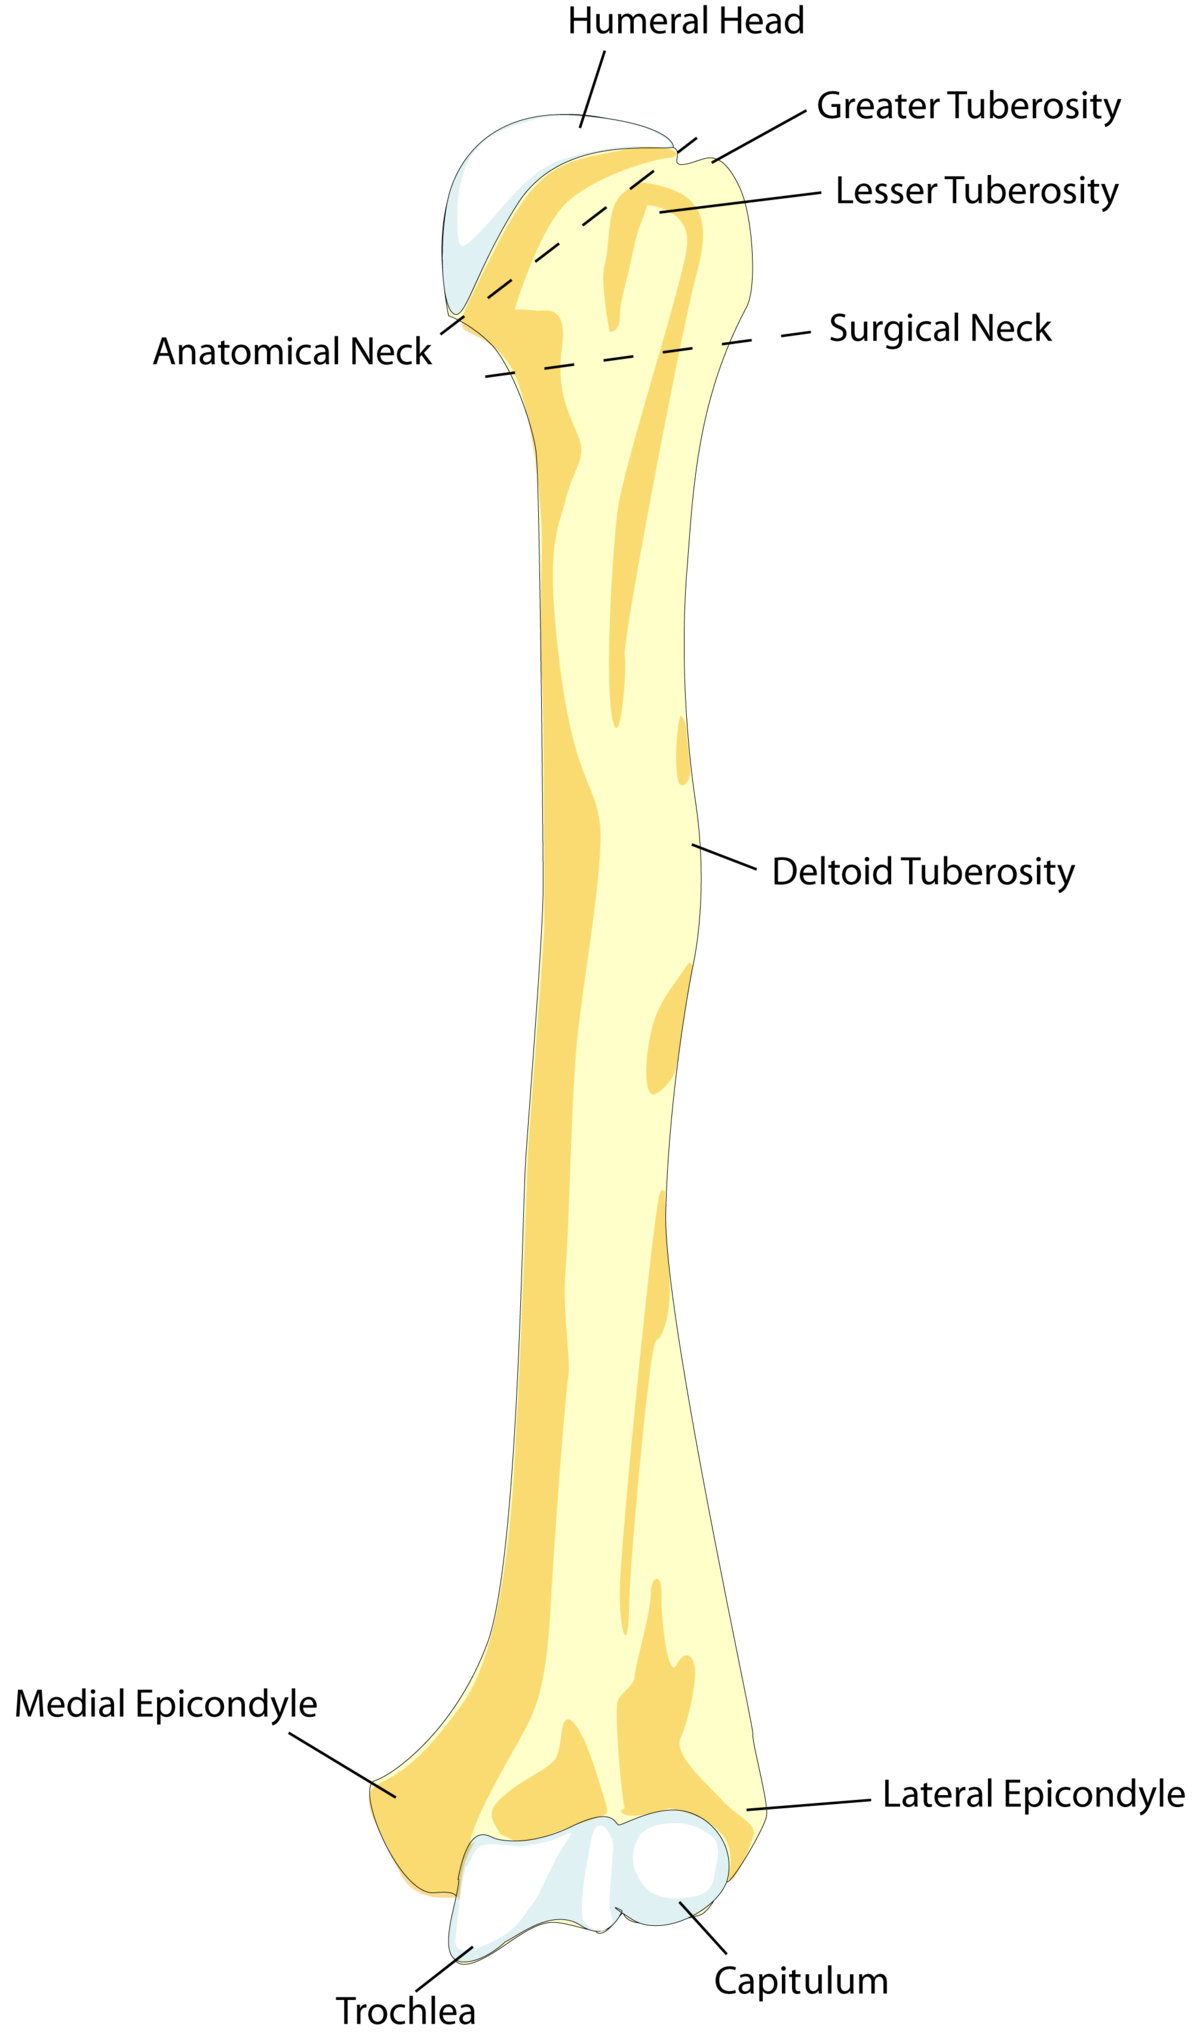 Humerus: What Is It, Location, Function, Most Important Facts, and